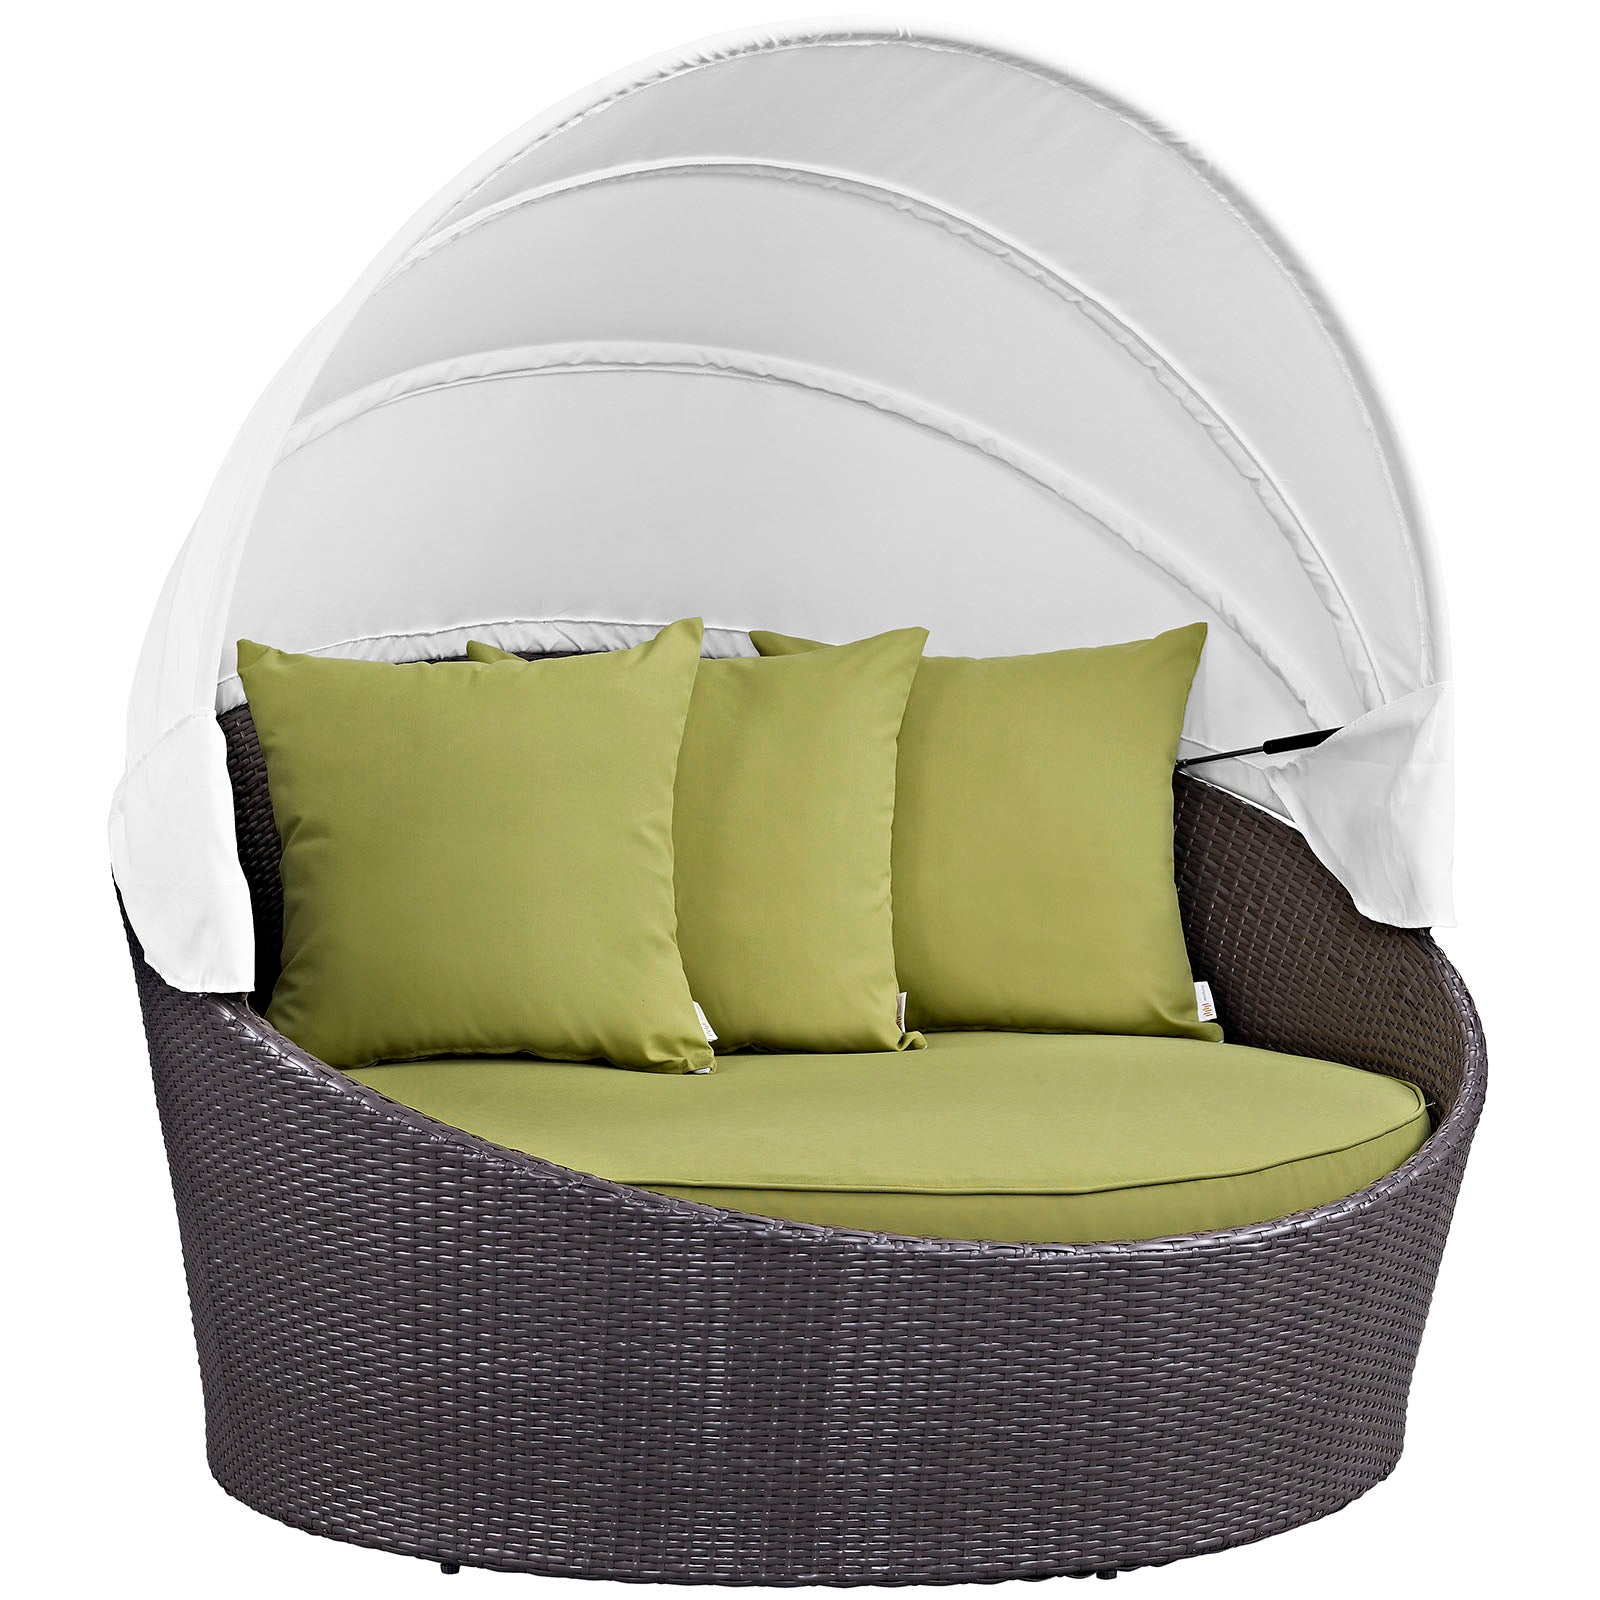 Modway Patio Daybeds - Convene Canopy Outdoor Patio Daybed Espresso Peridot